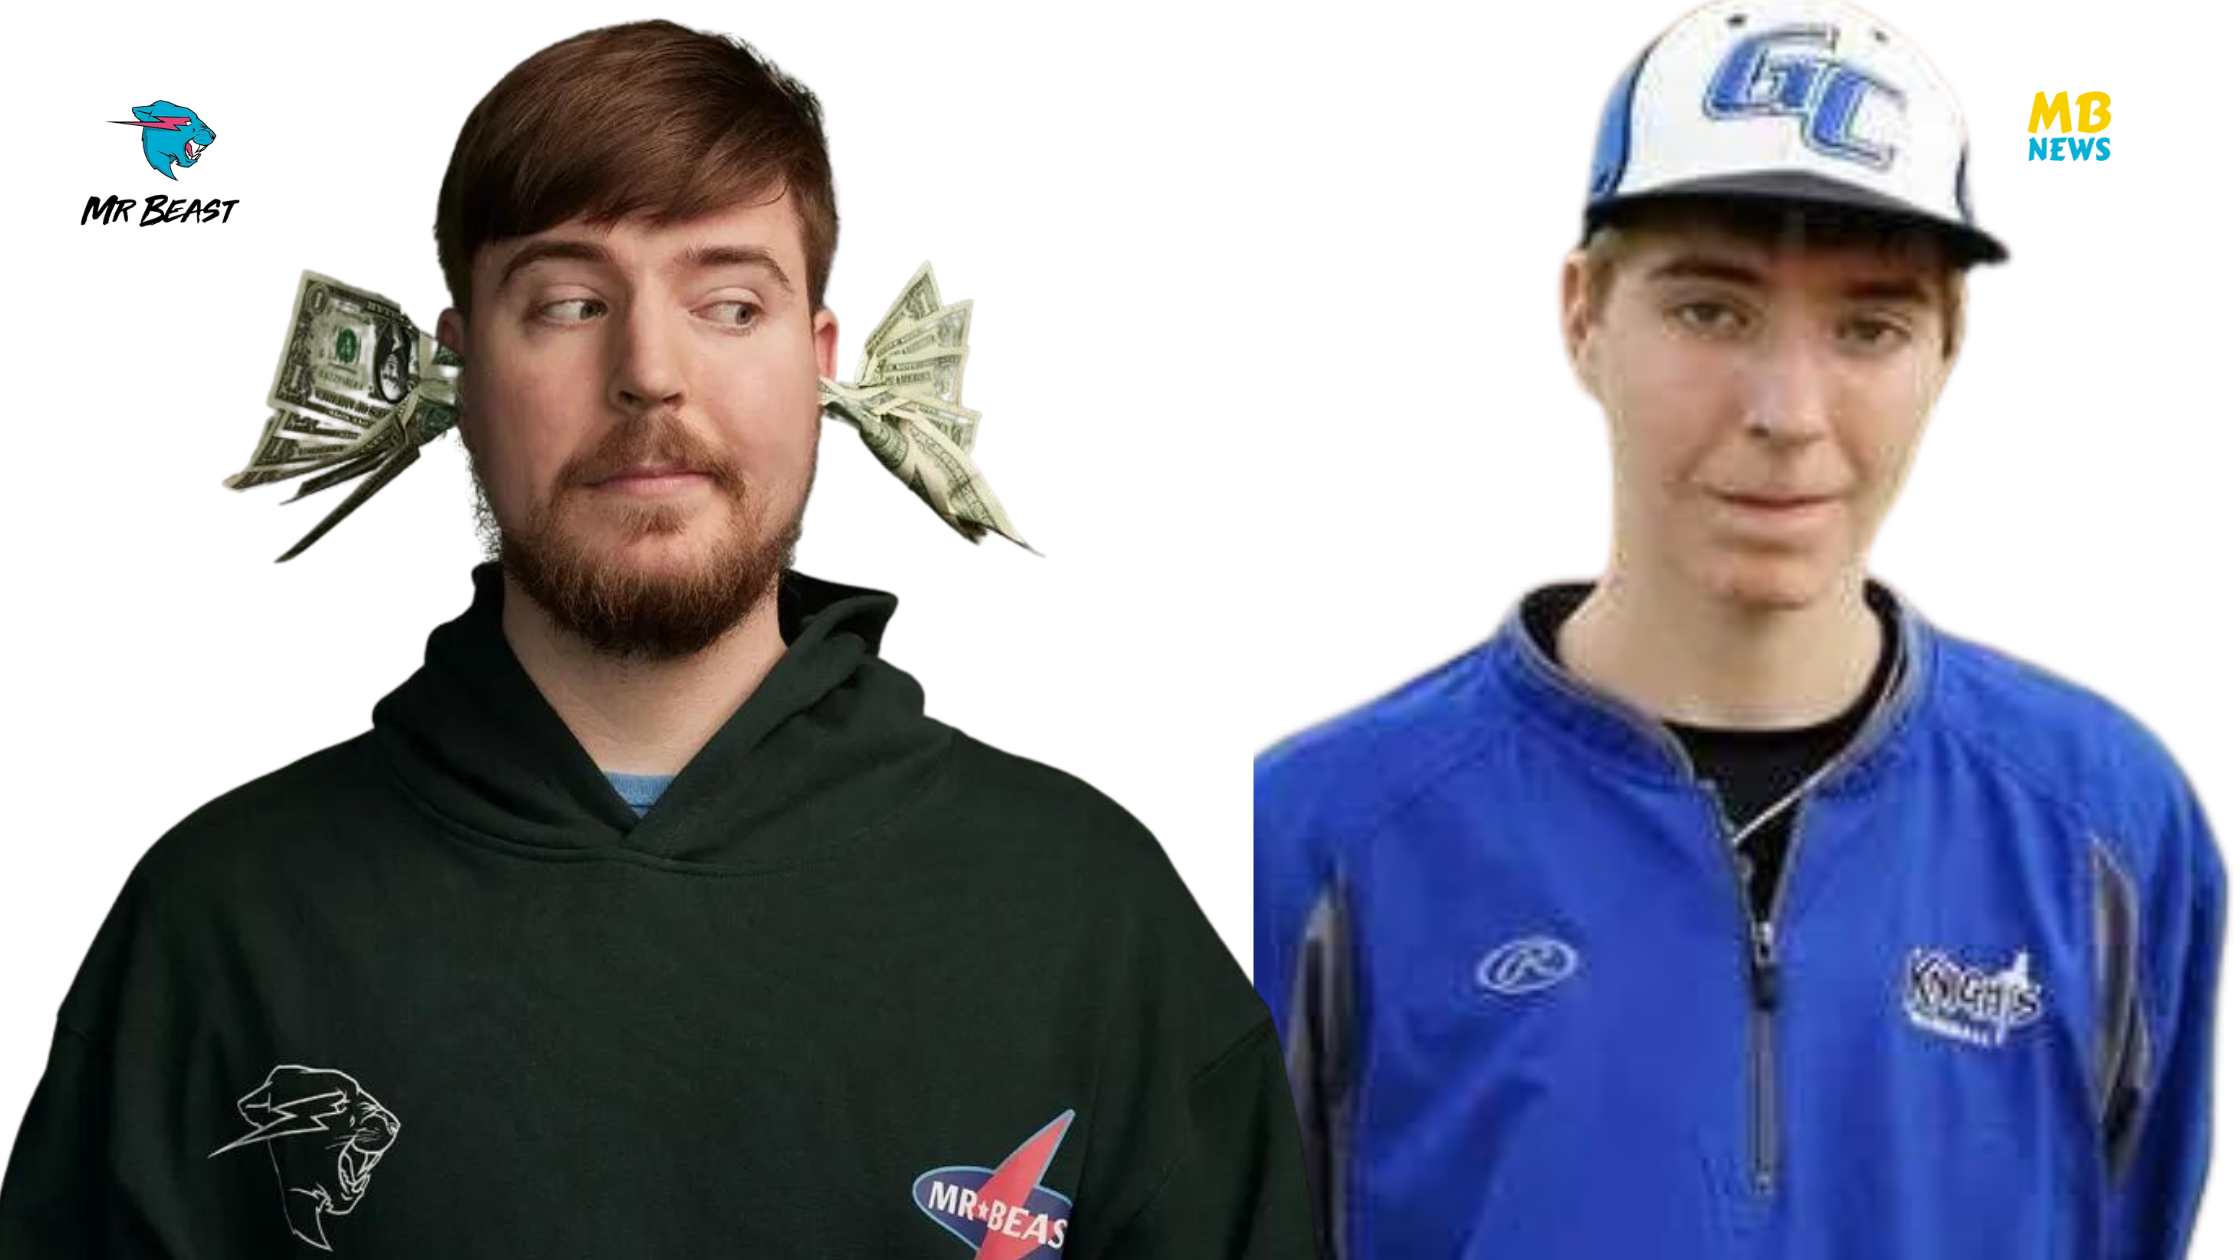 MrBeast's Remarkable Journey From Baseball to YouTube Star and Crohn's Disease Battle!